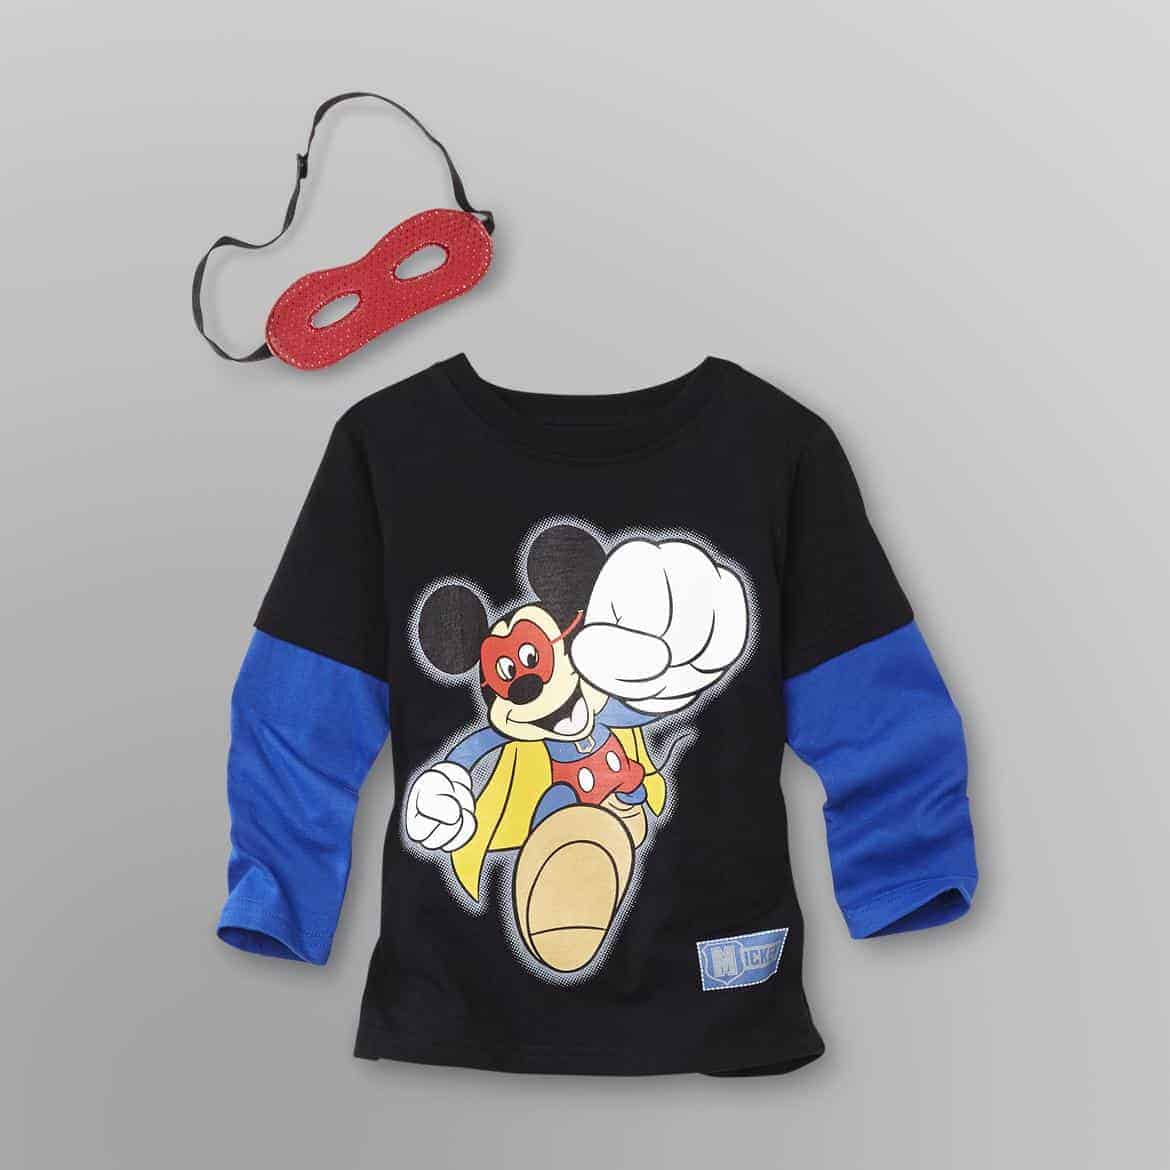 super mickey tee and mask